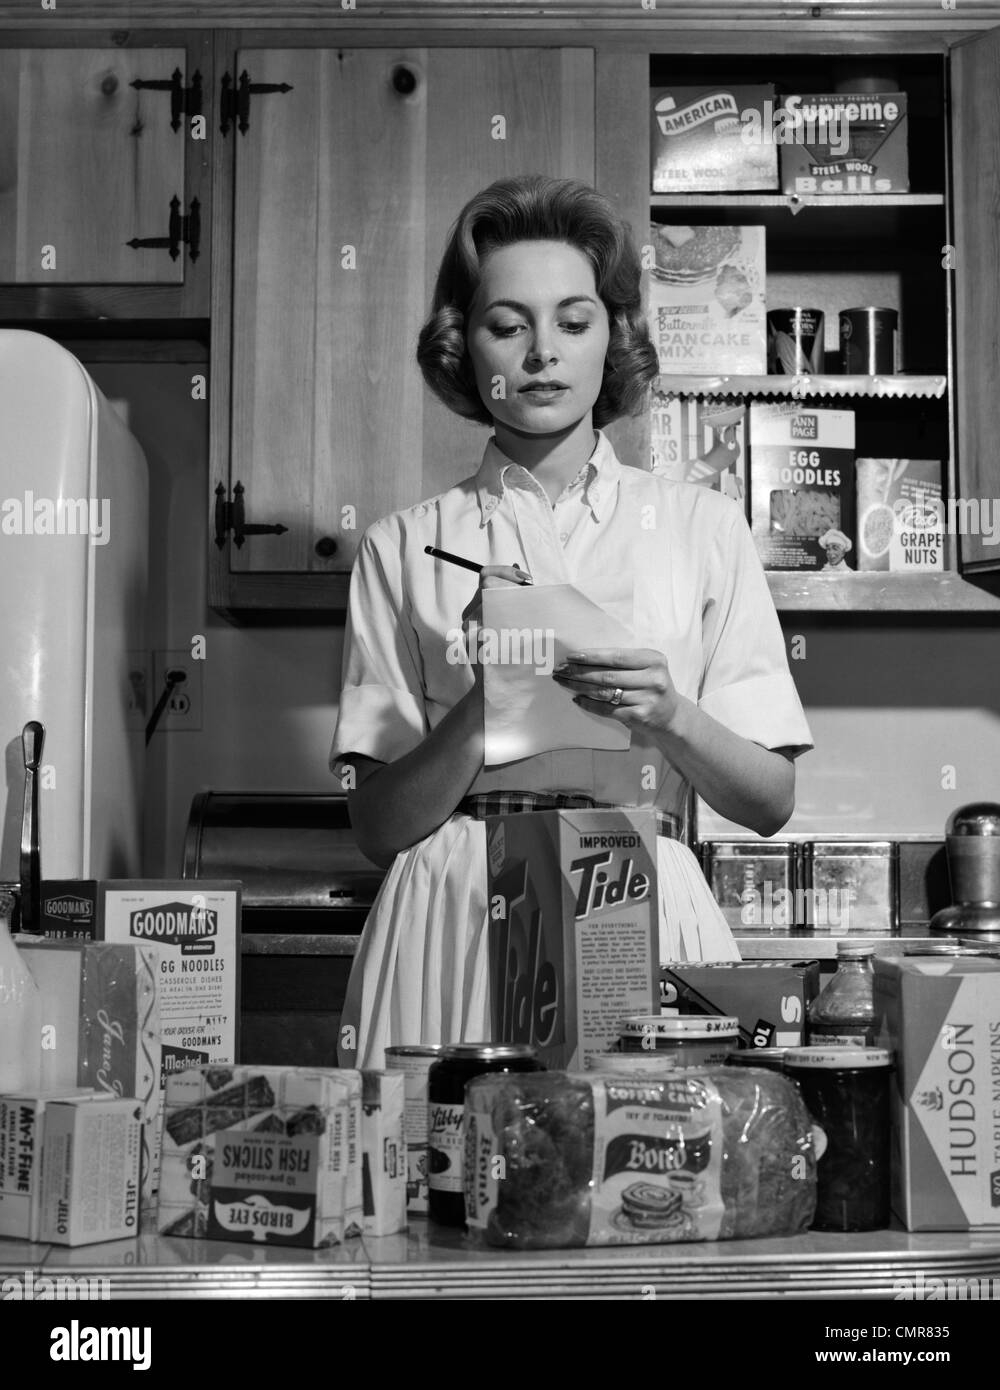 1960s WOMAN HOUSEWIFE IN KITCHEN CHECKING GROCERY FOOD 